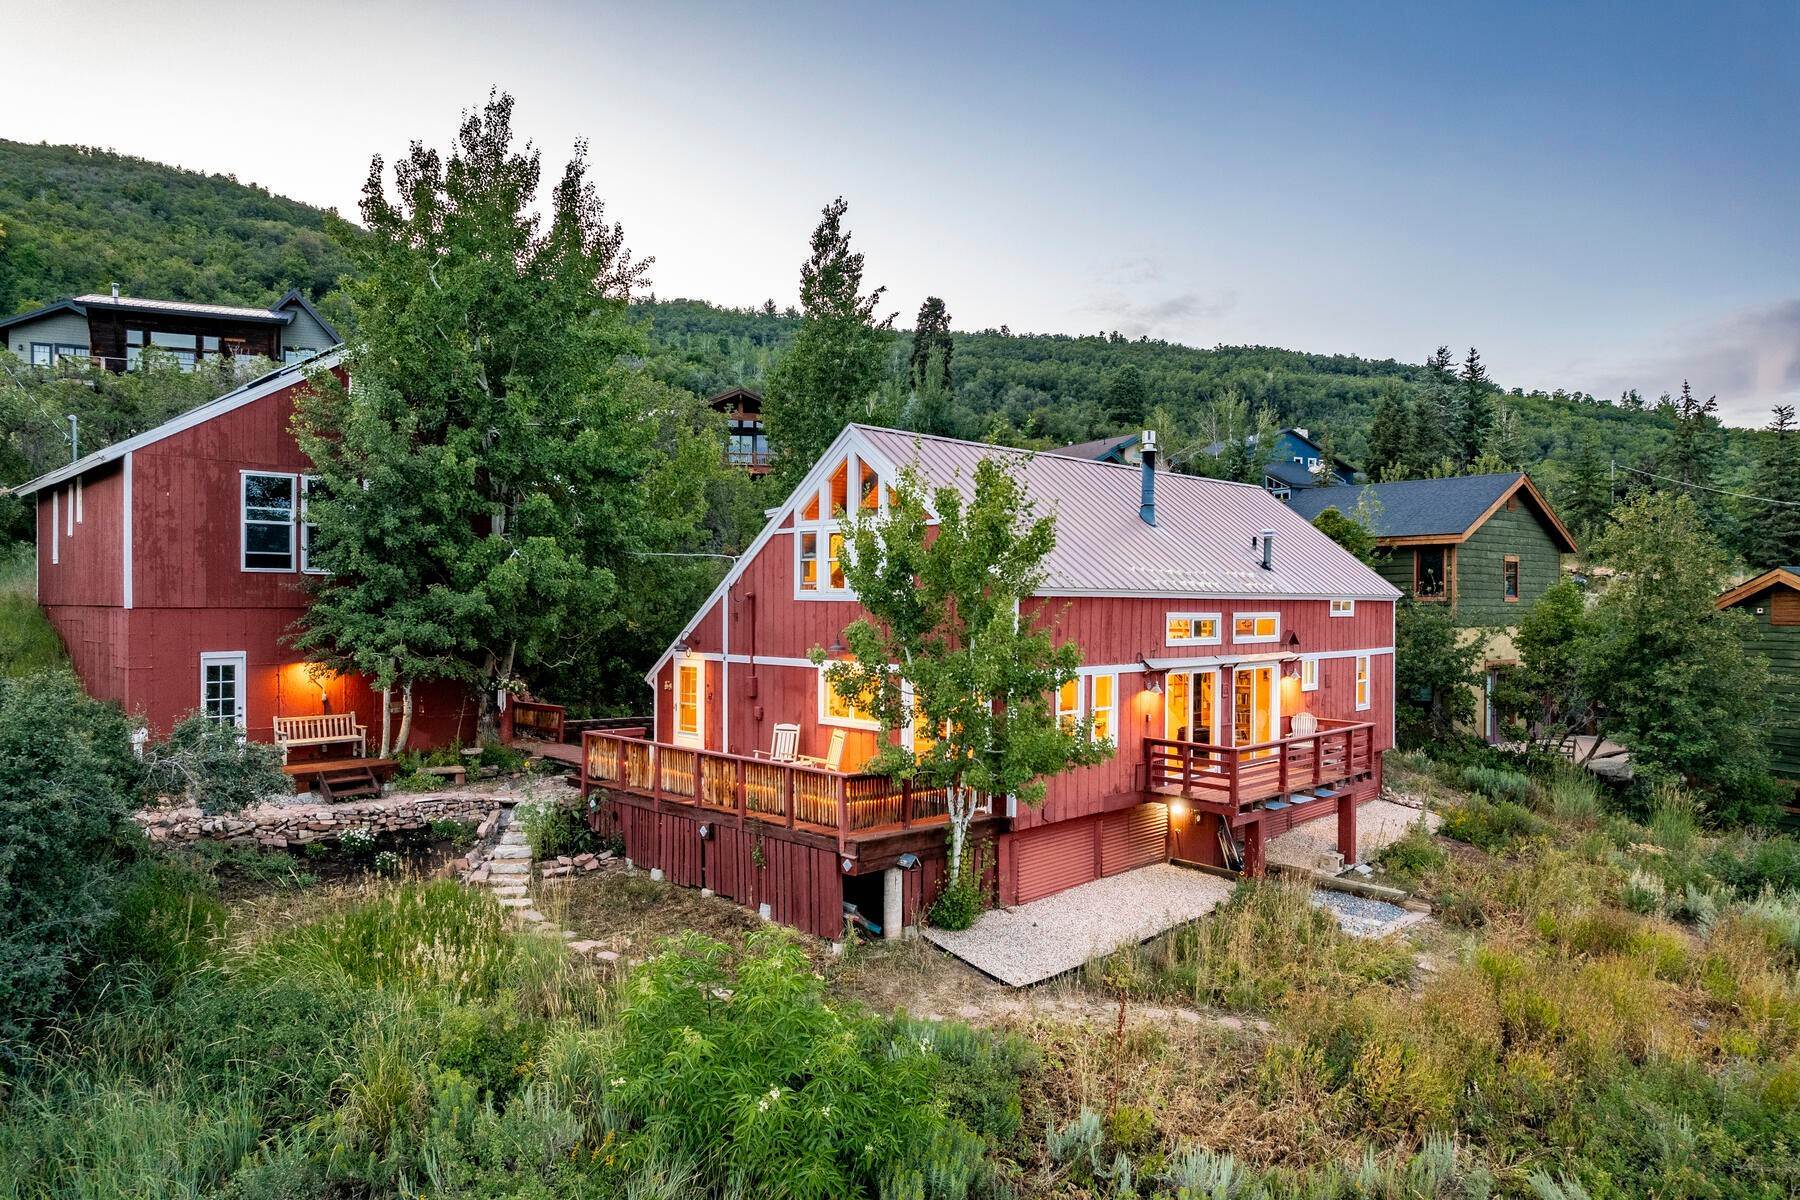 Single Family Homes for Sale at Classic Mountain Home in a Magical Setting 8808 Northcove Drive Park City, Utah 84098 United States